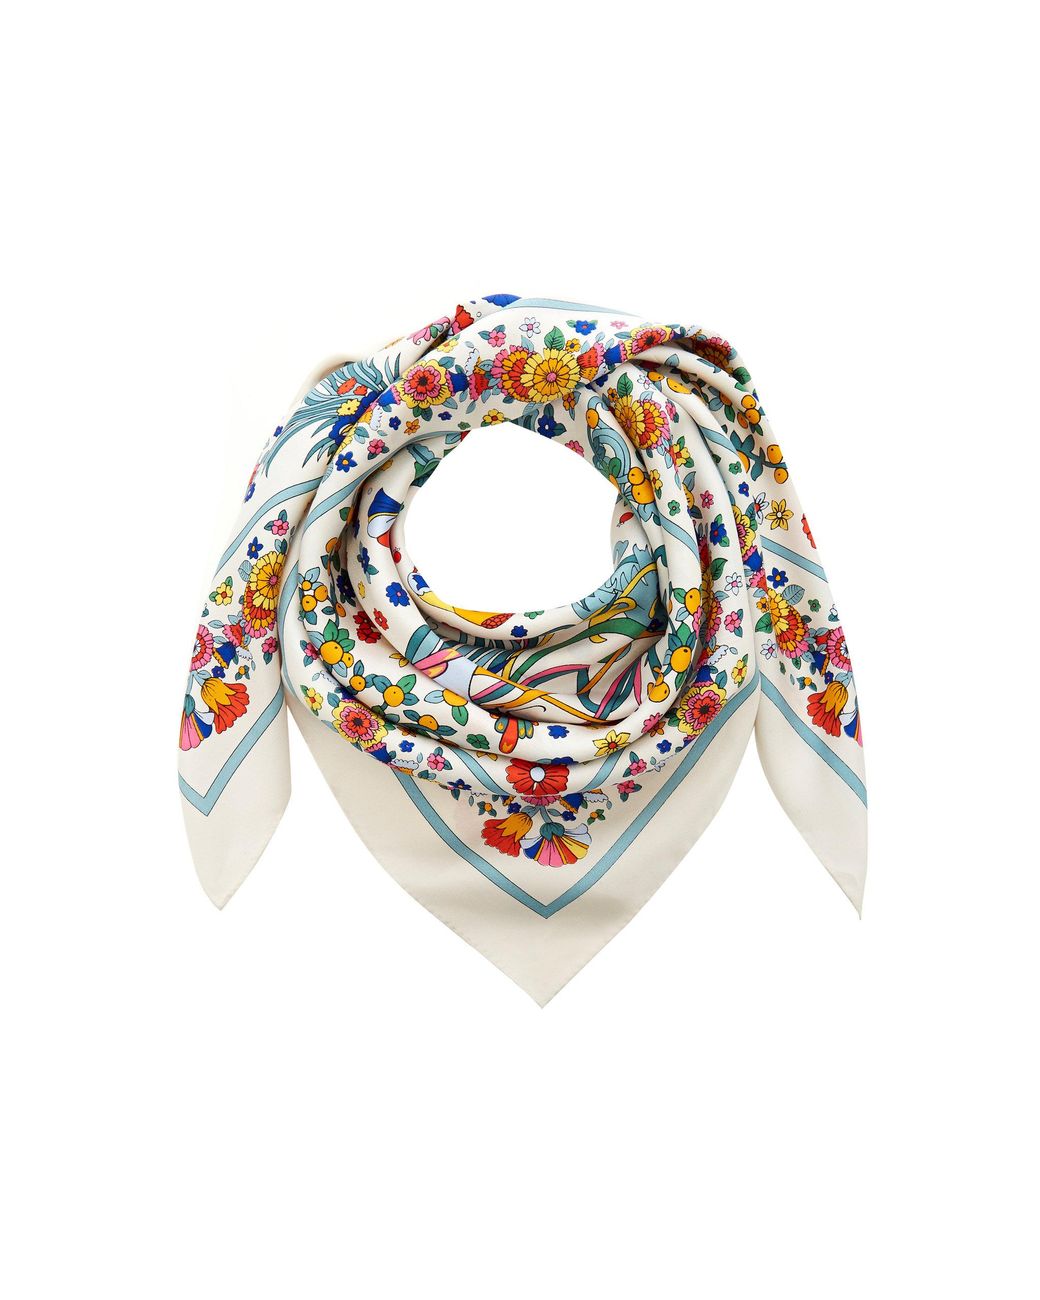 Tory Burch Promised Land Silk Square Scarf | Lyst